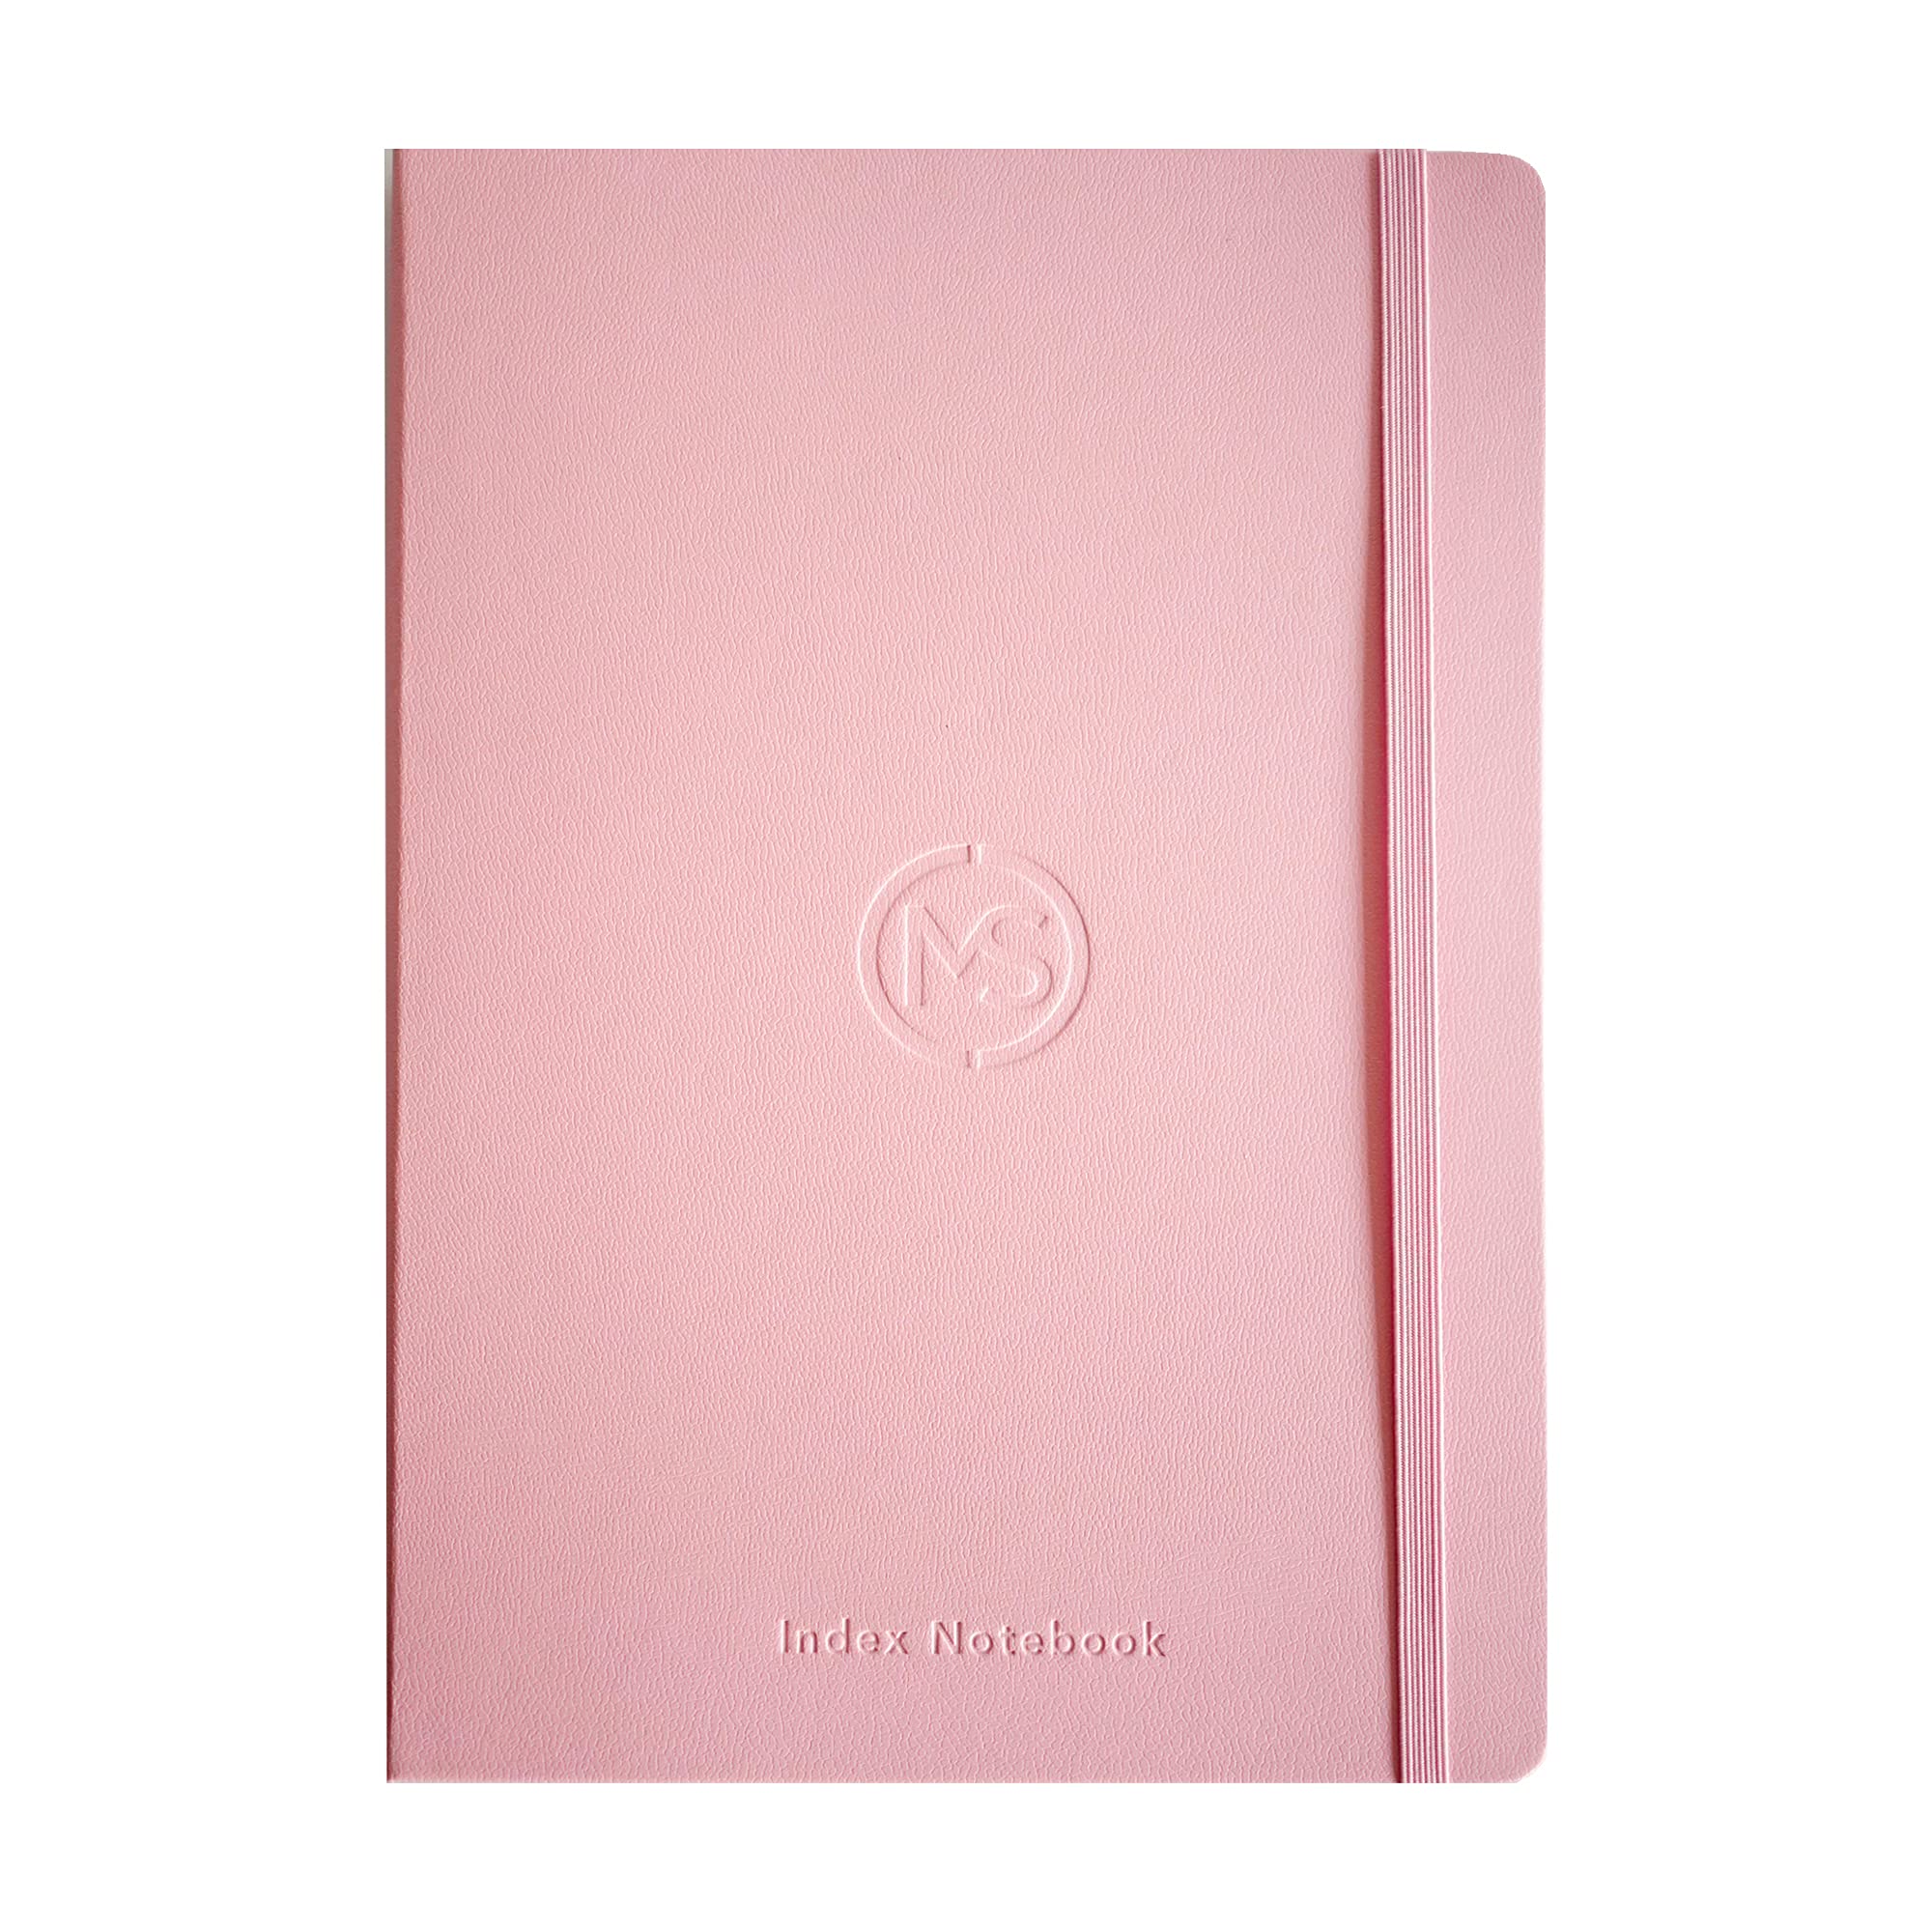 A6 Index Notebook Hardback Leatherette Cover 8mm Ruled Margin A-Z Tabs 264 Pages 100 GSM White Paper – 11 X 16 CM Index Notebook (Blush Pink)